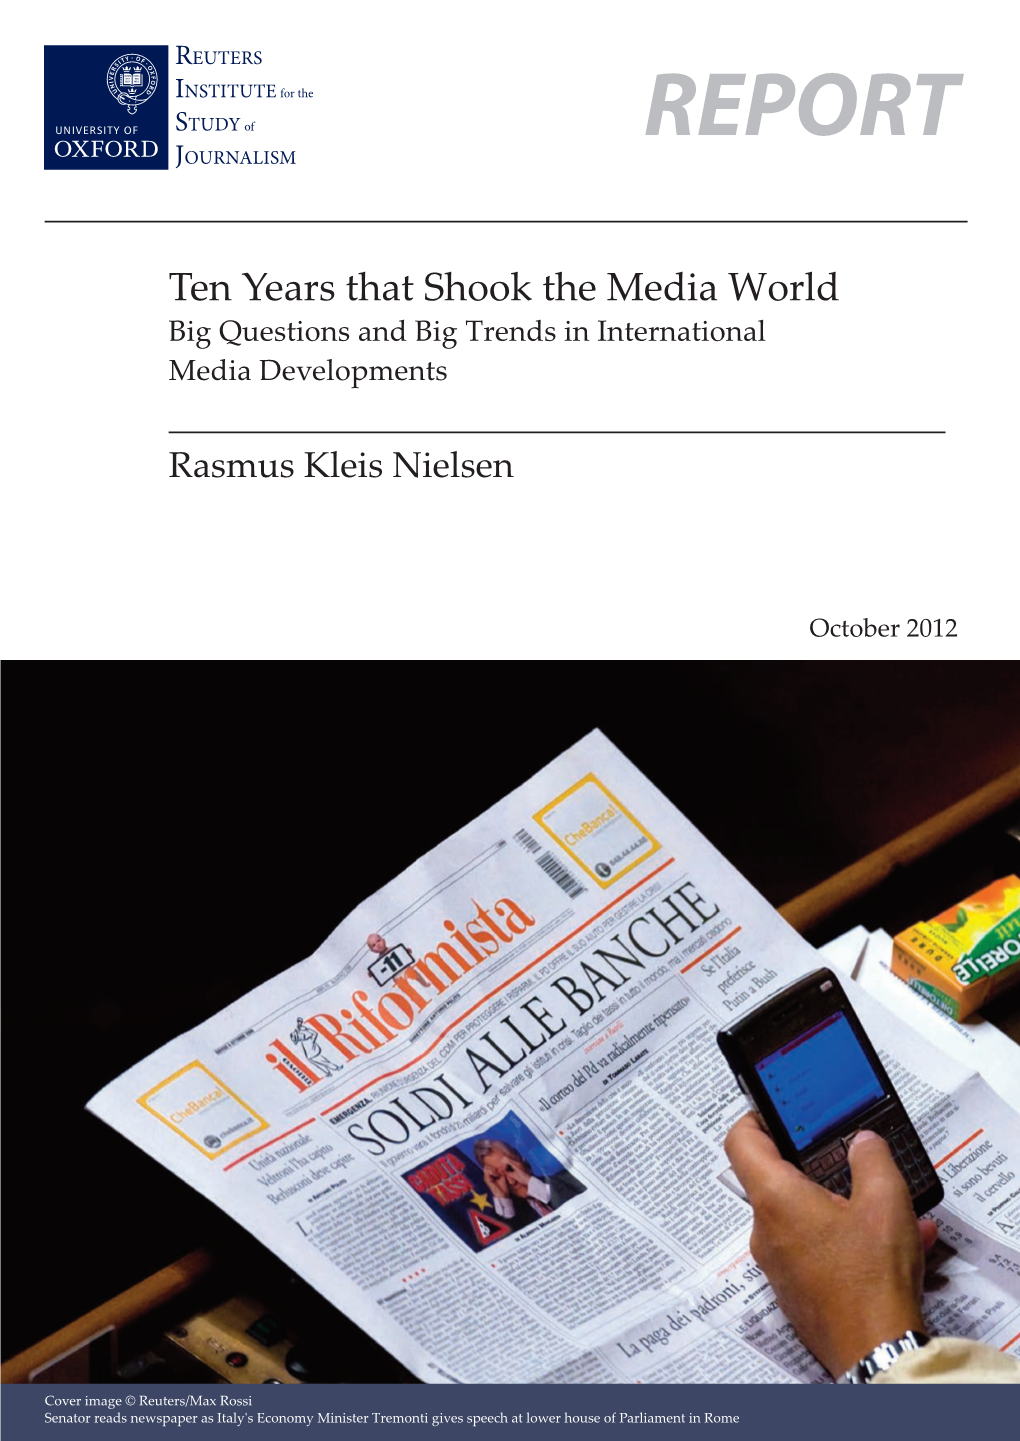 Ten Years That Shook the Media World Layout 1 25/09/2012 14:49 Page 2